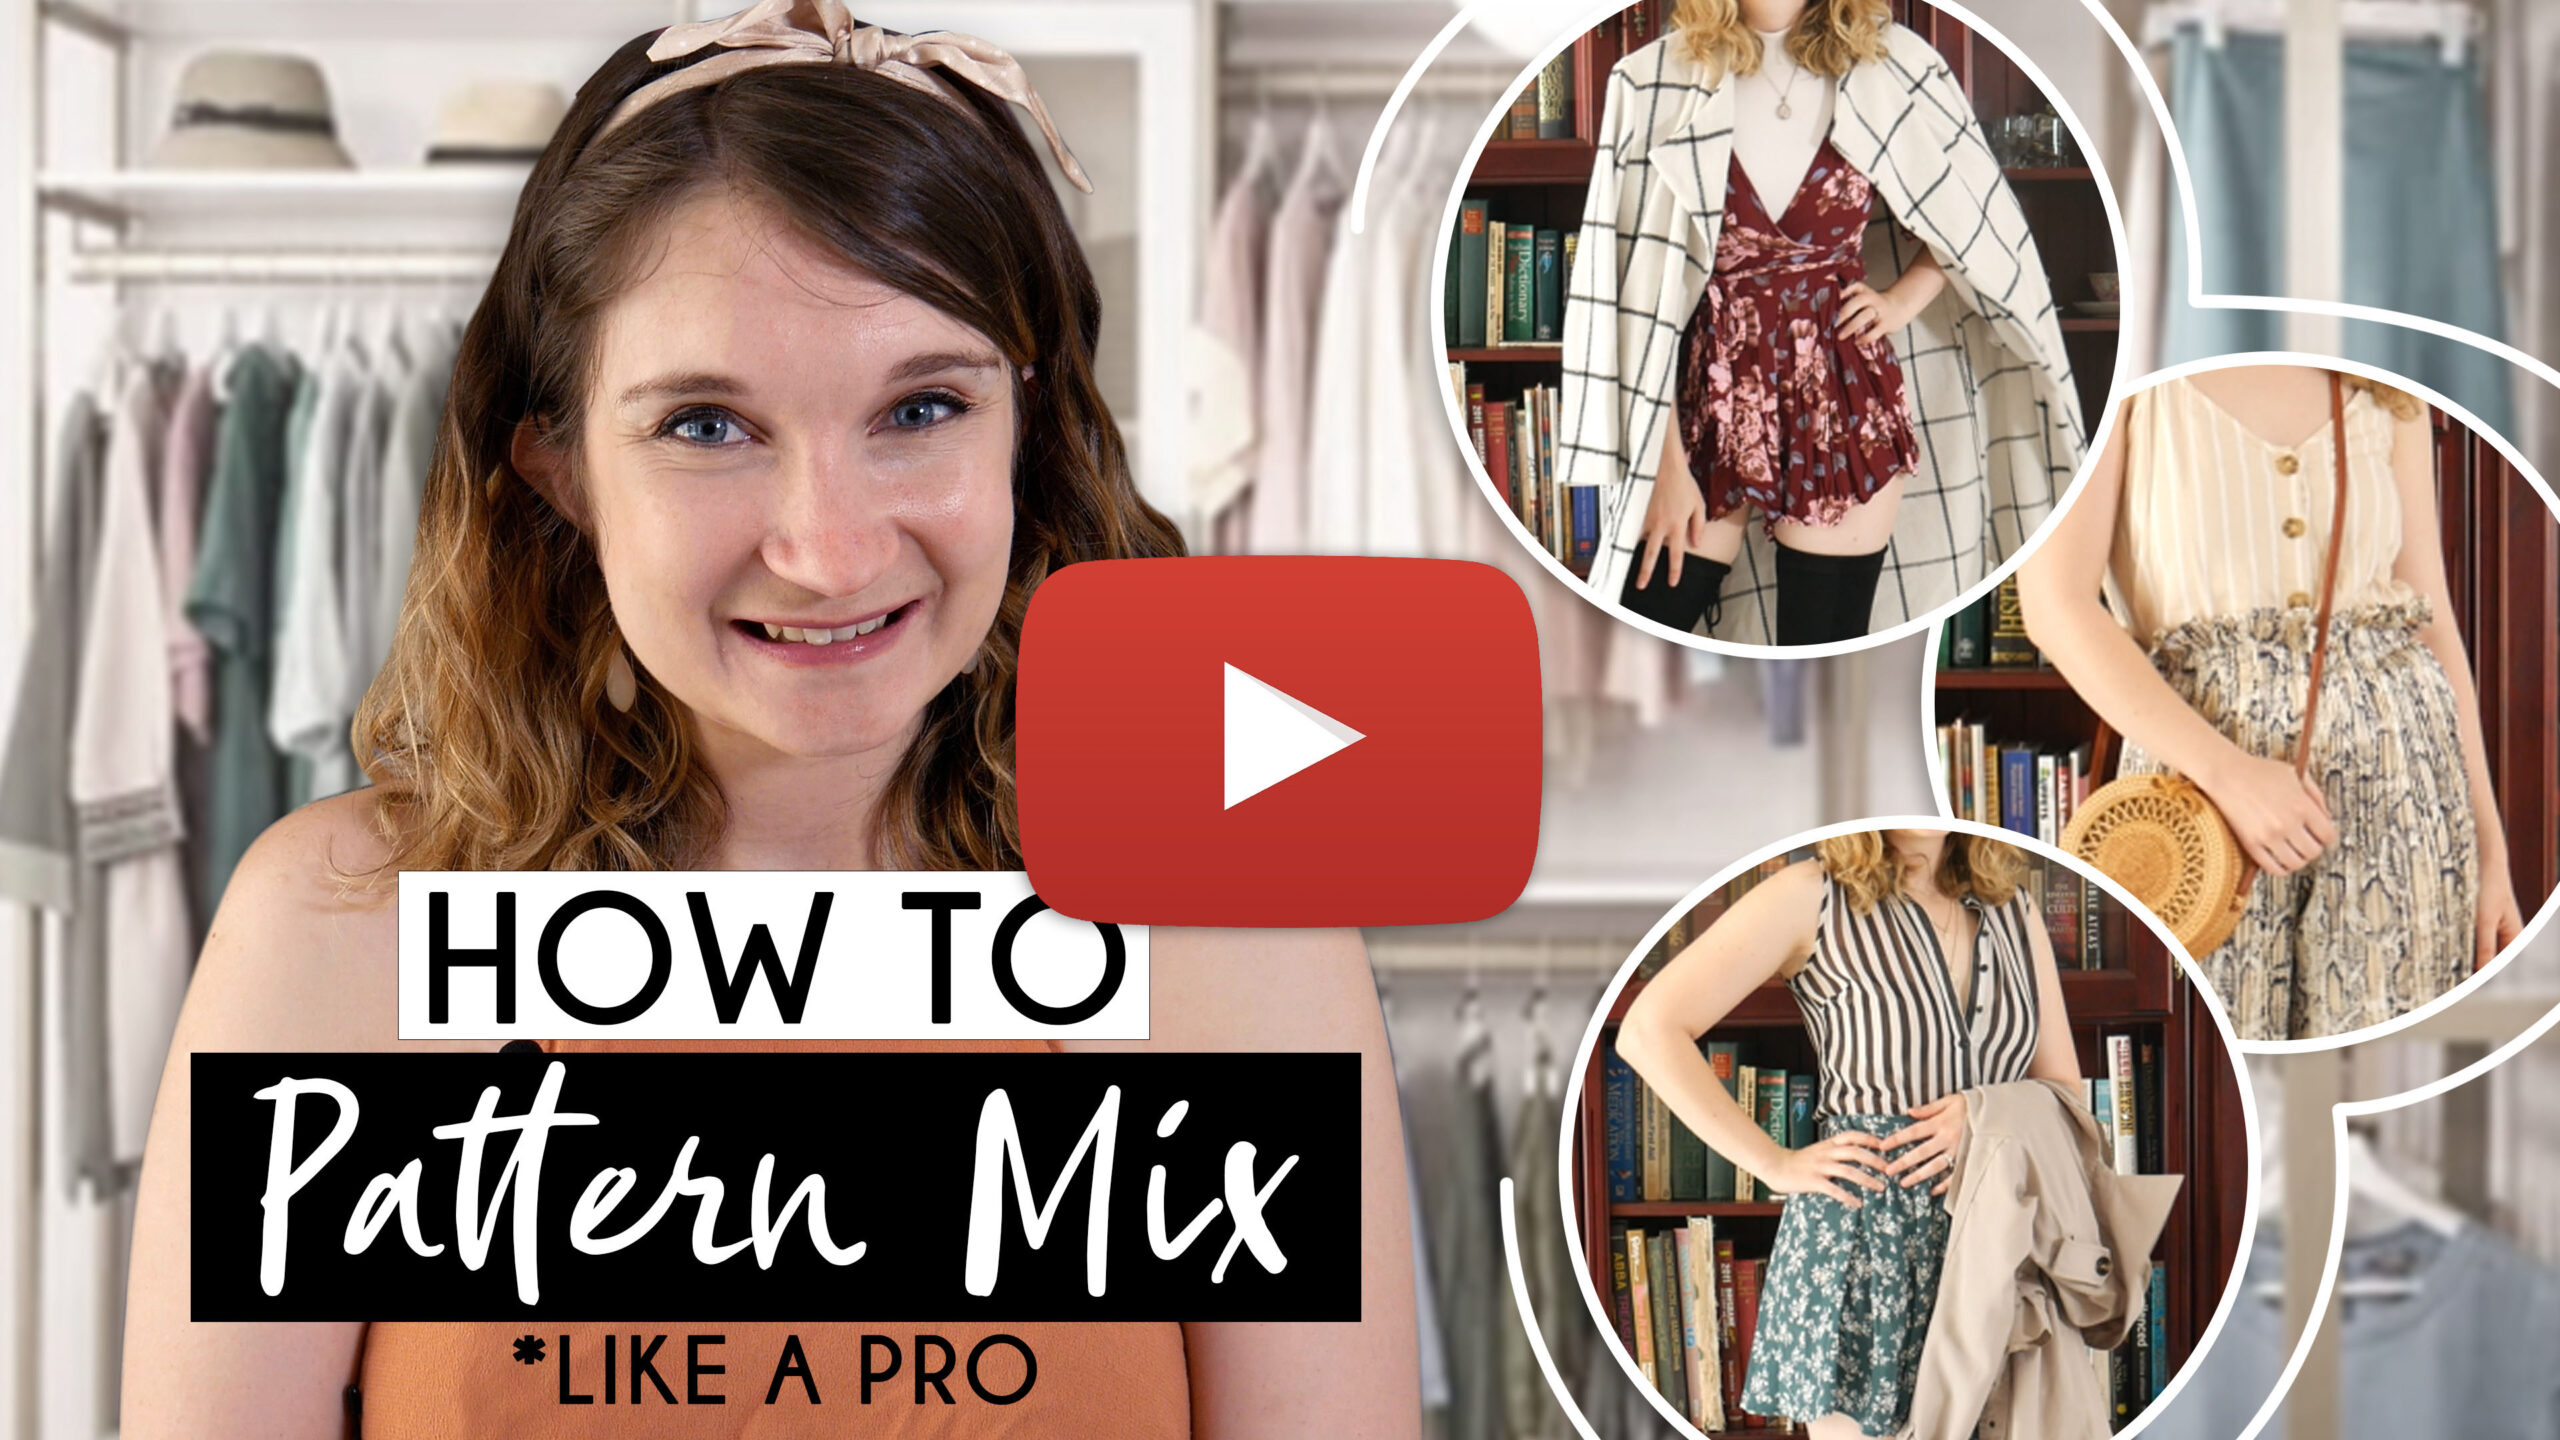 How to Pattern Mix Youtube Thumbnail Play Button